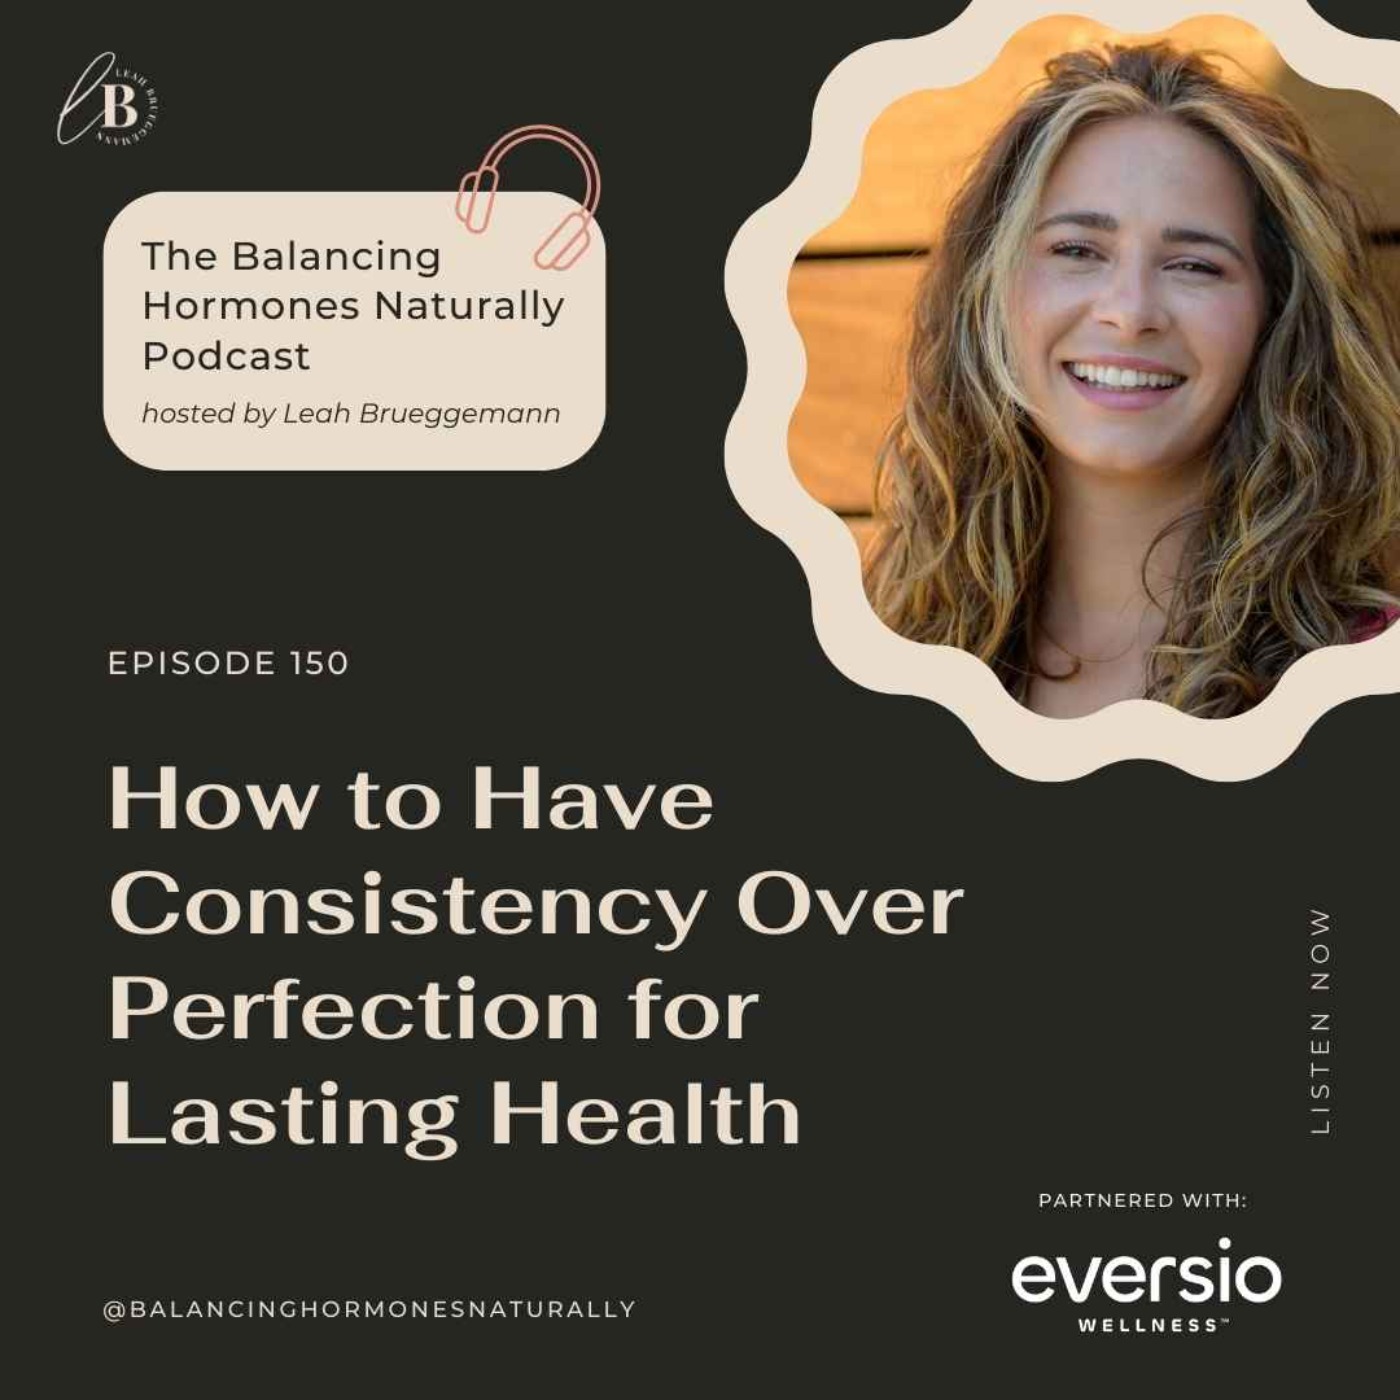 Episode 150: How to Have Consistency Over Perfection for Lasting Health